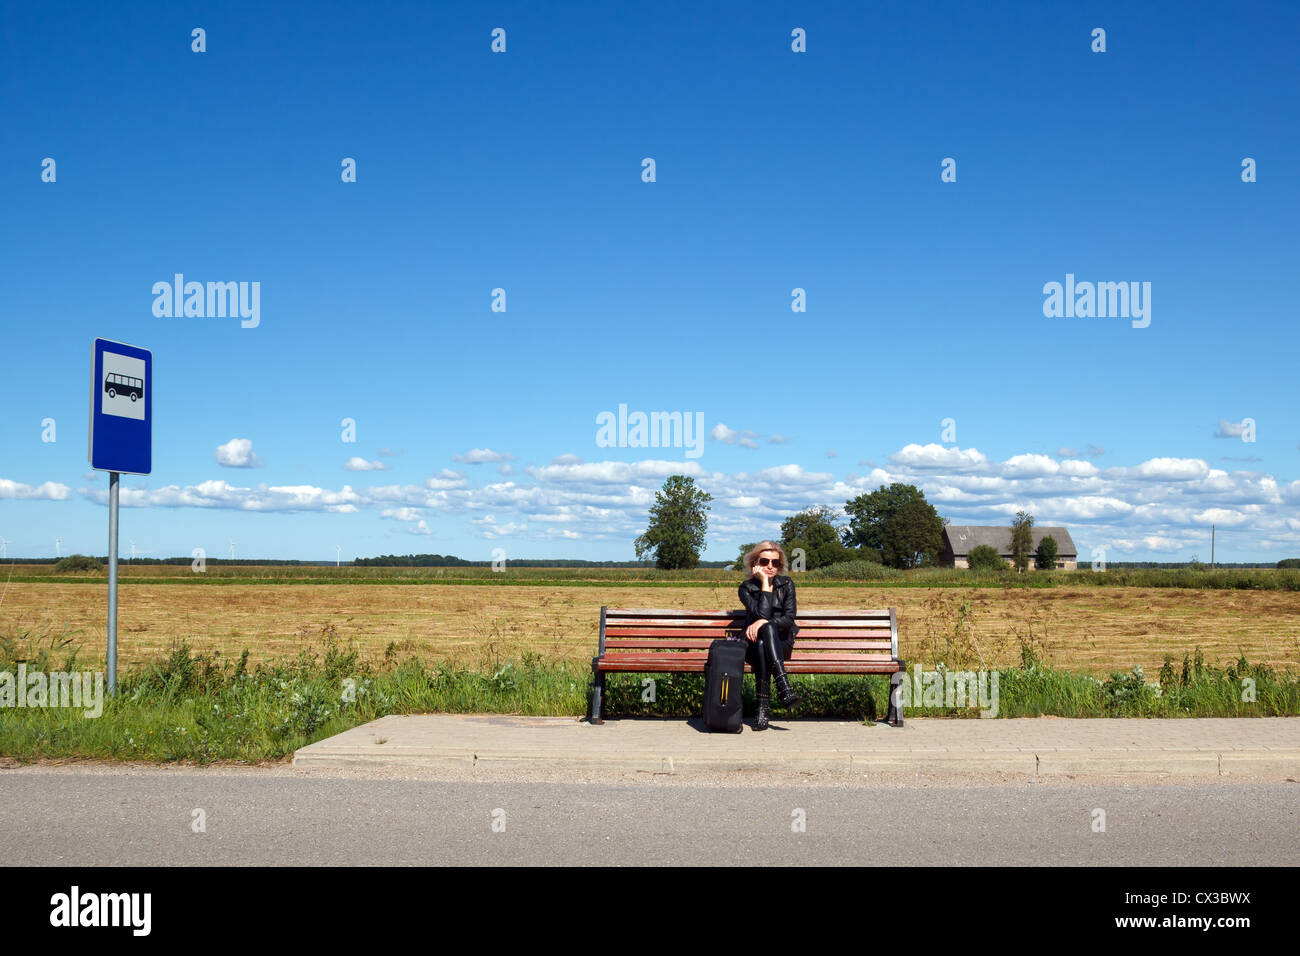 lonely woman sitting on a bench at a bus stop in the countryside Stock Photo